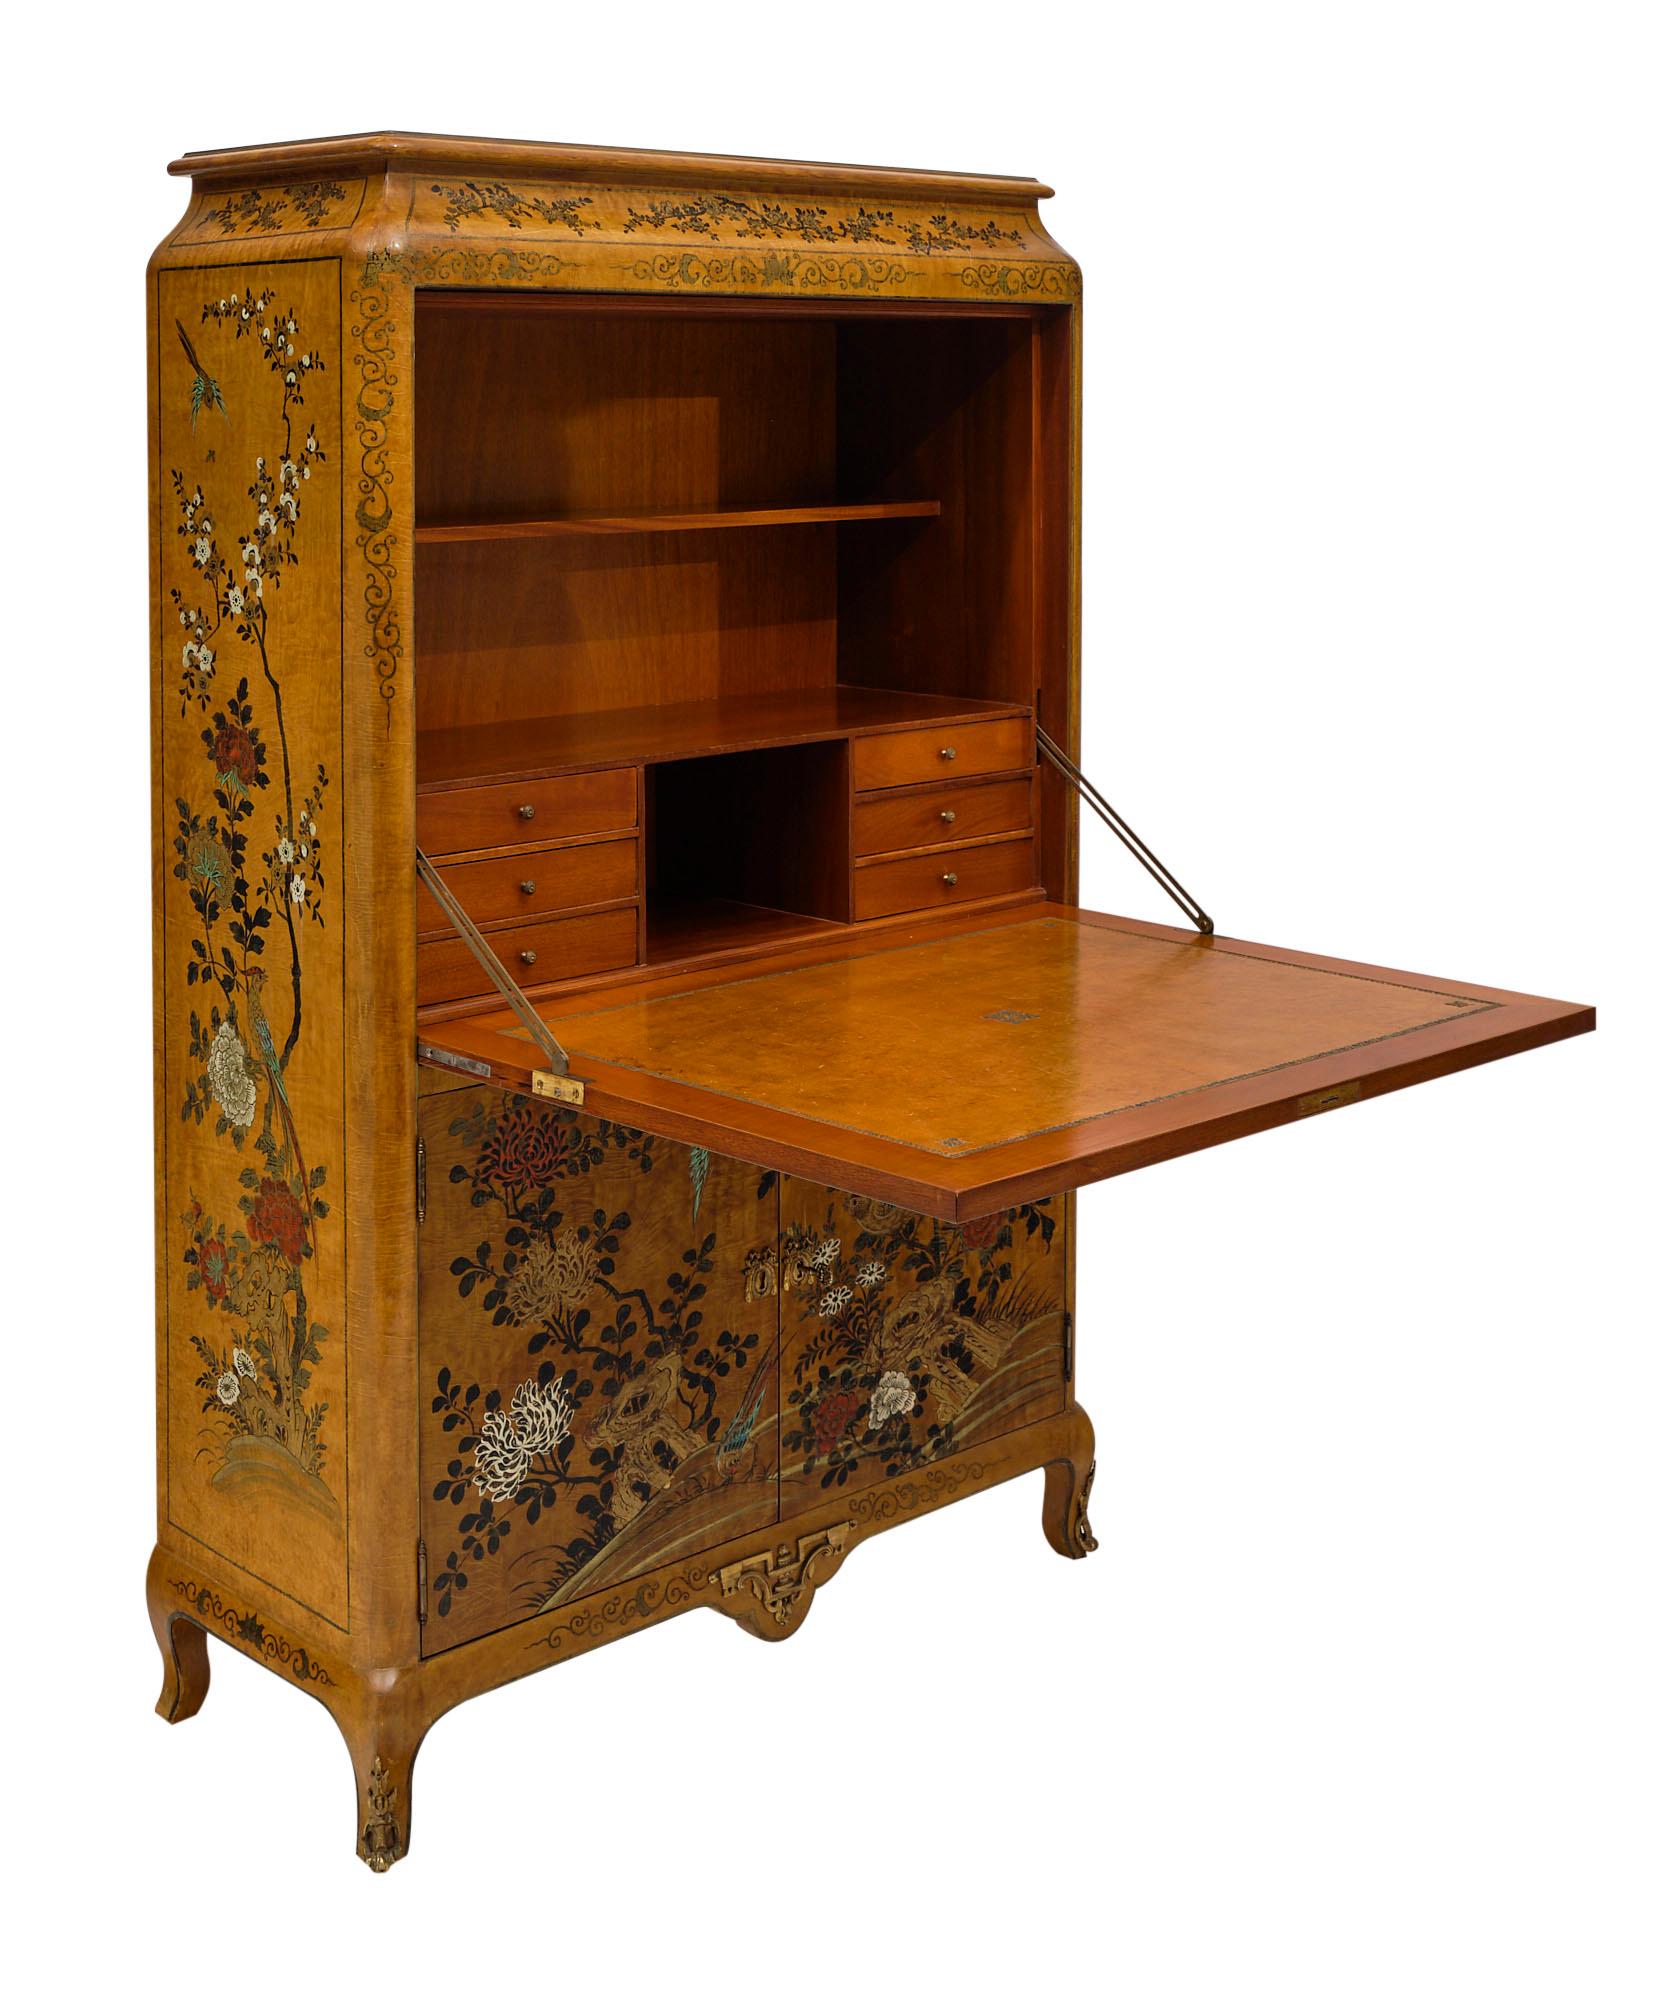 Brass Antique French Chinoiserie Secretaire